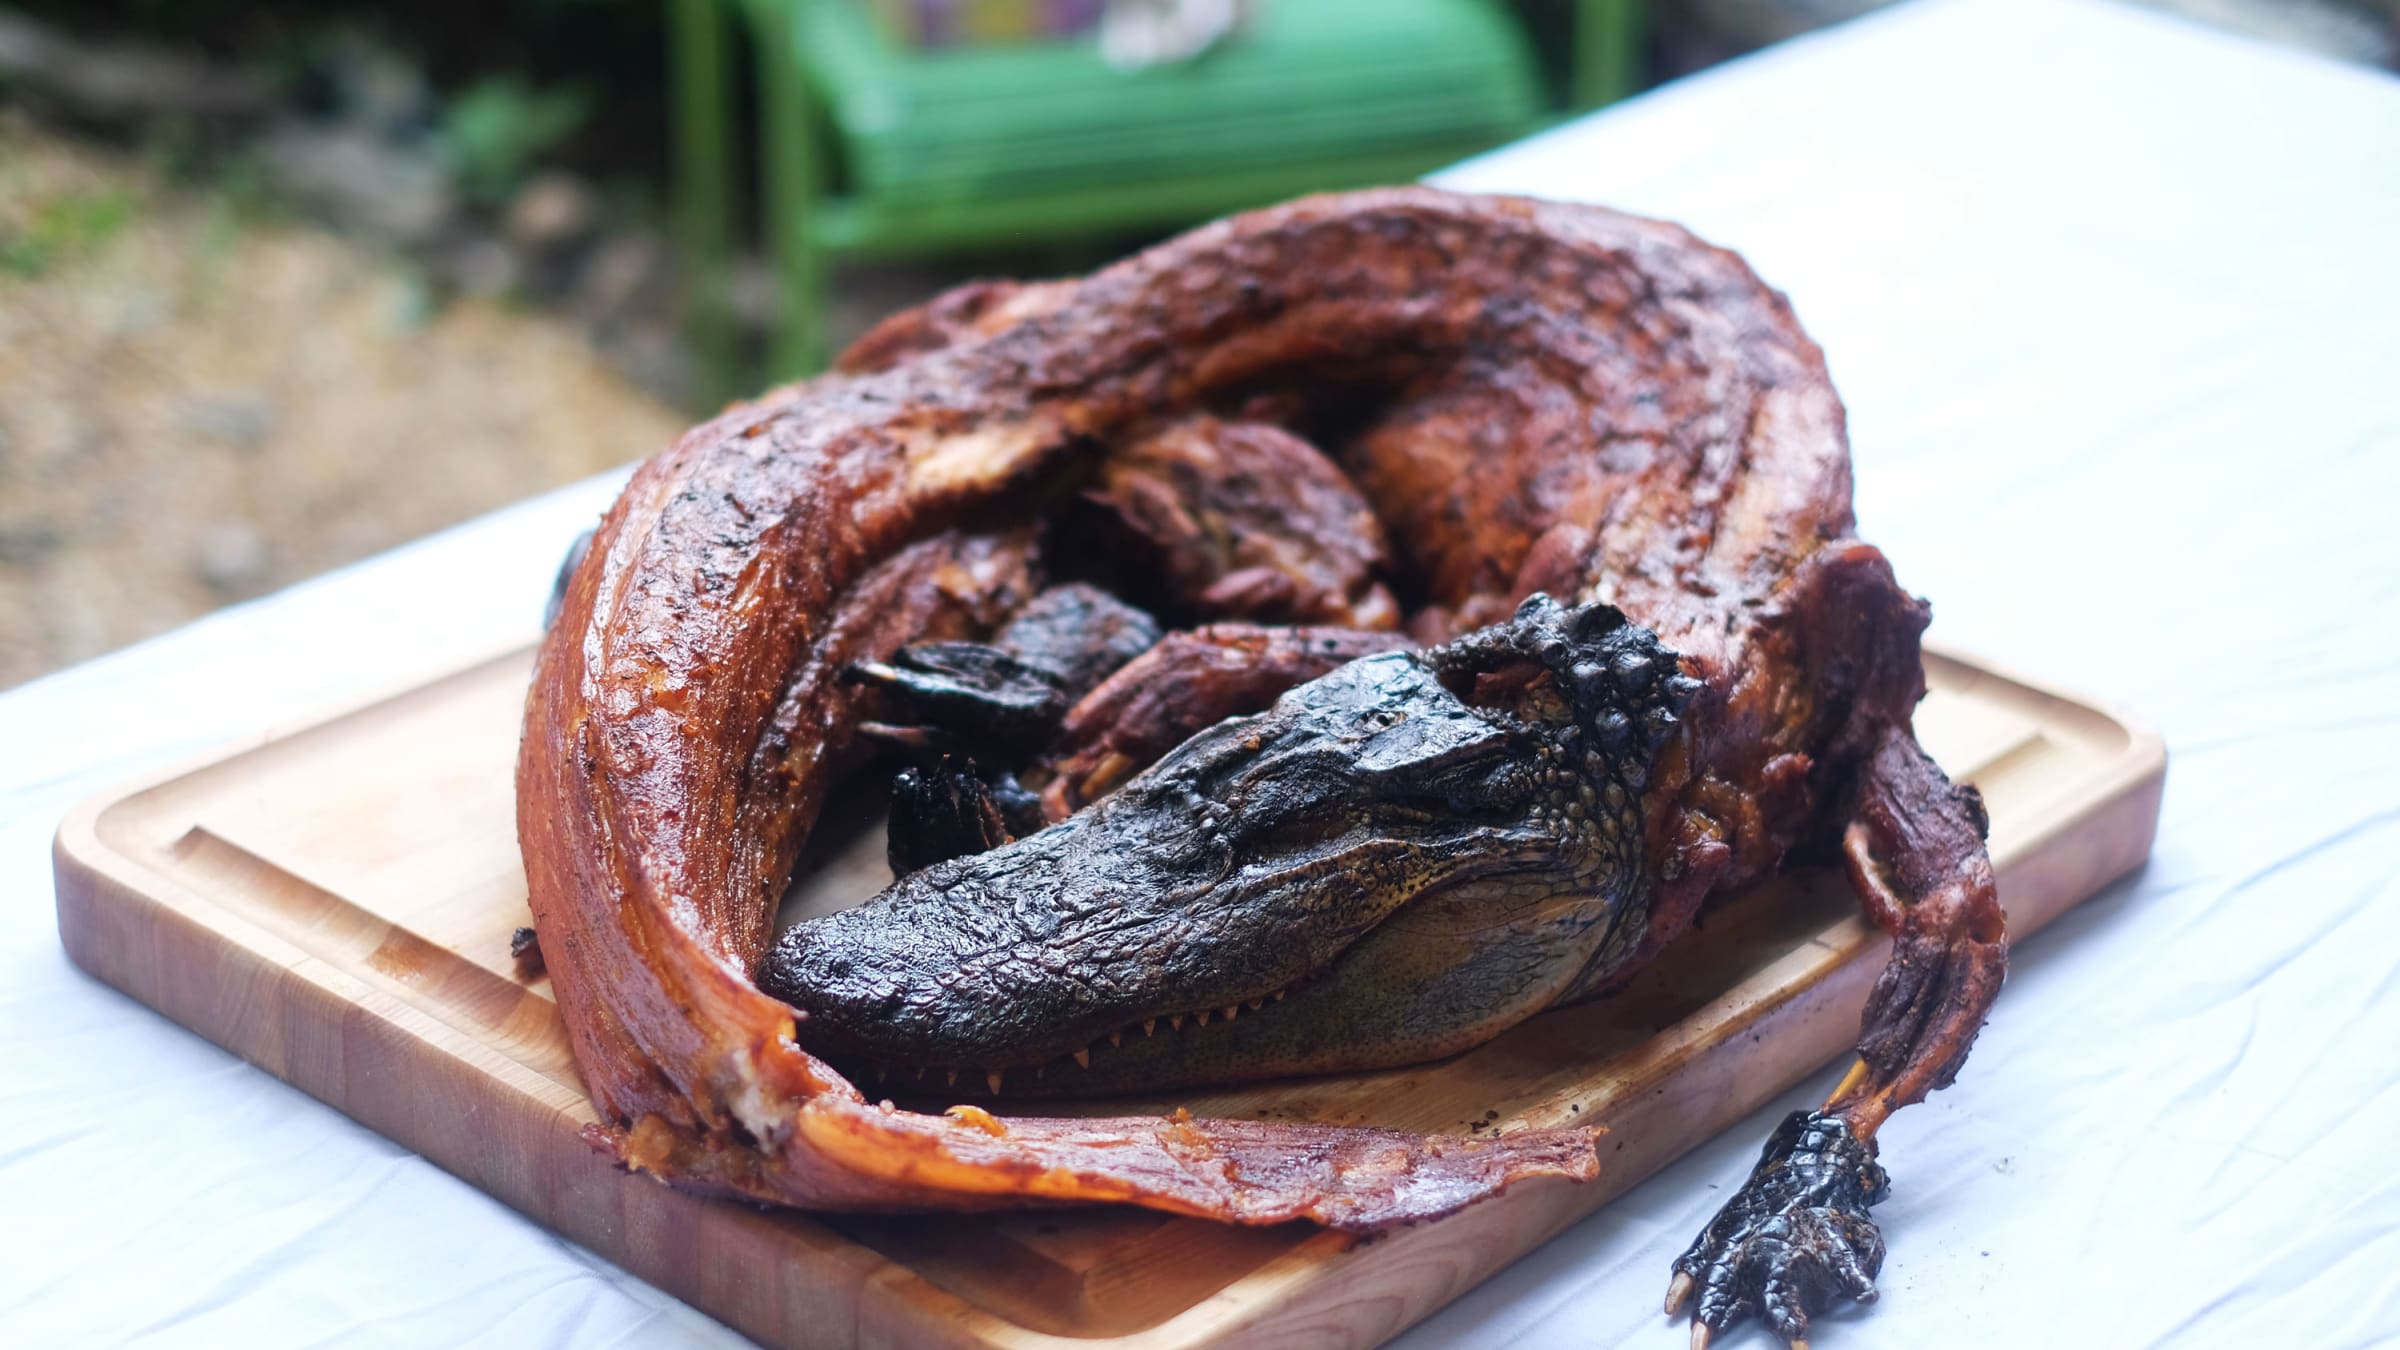 Yes, You Can Cook a Whole Alligator at Home Adult Picture